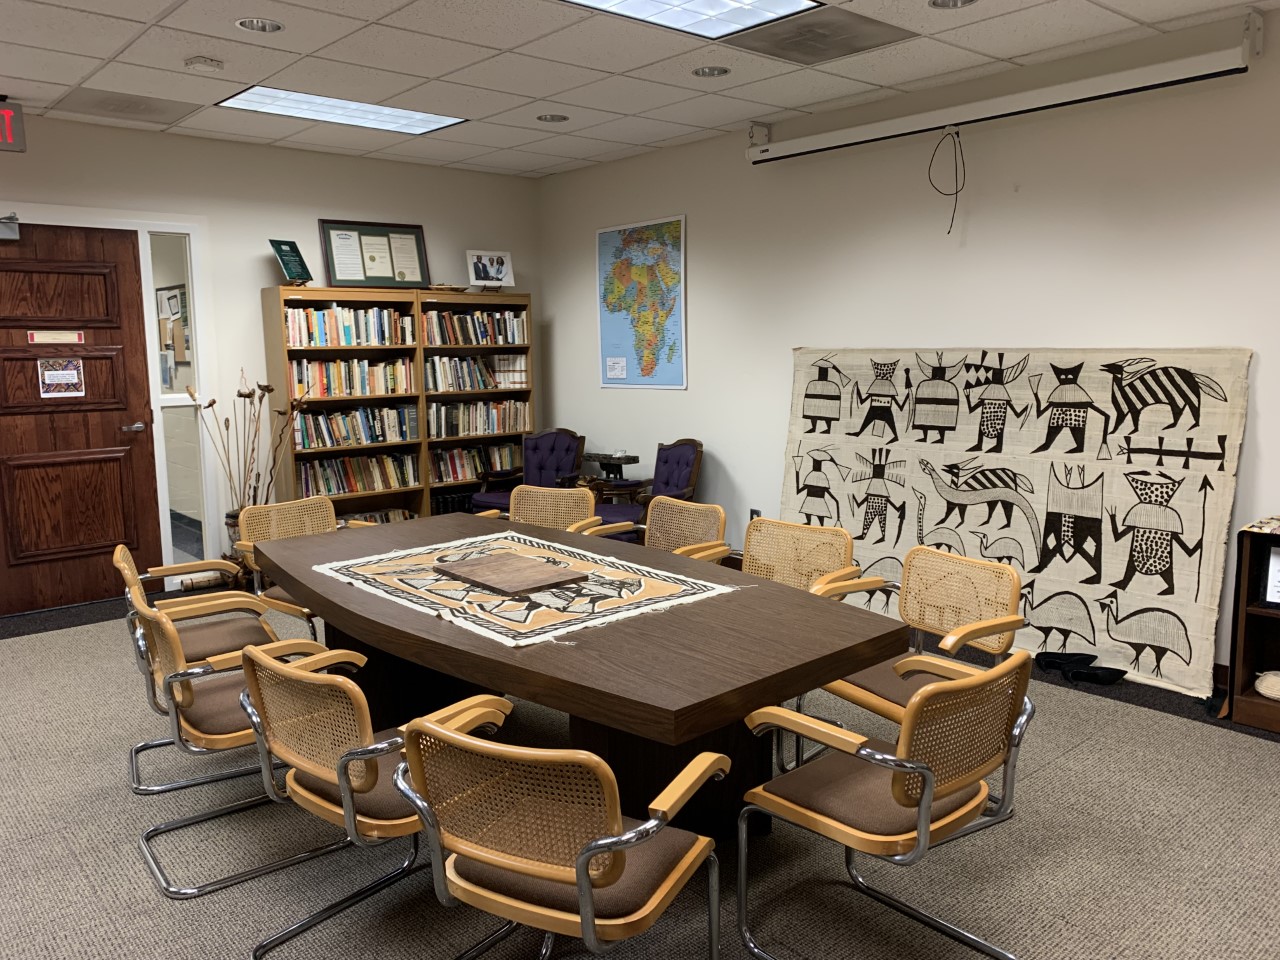 IBL conference room